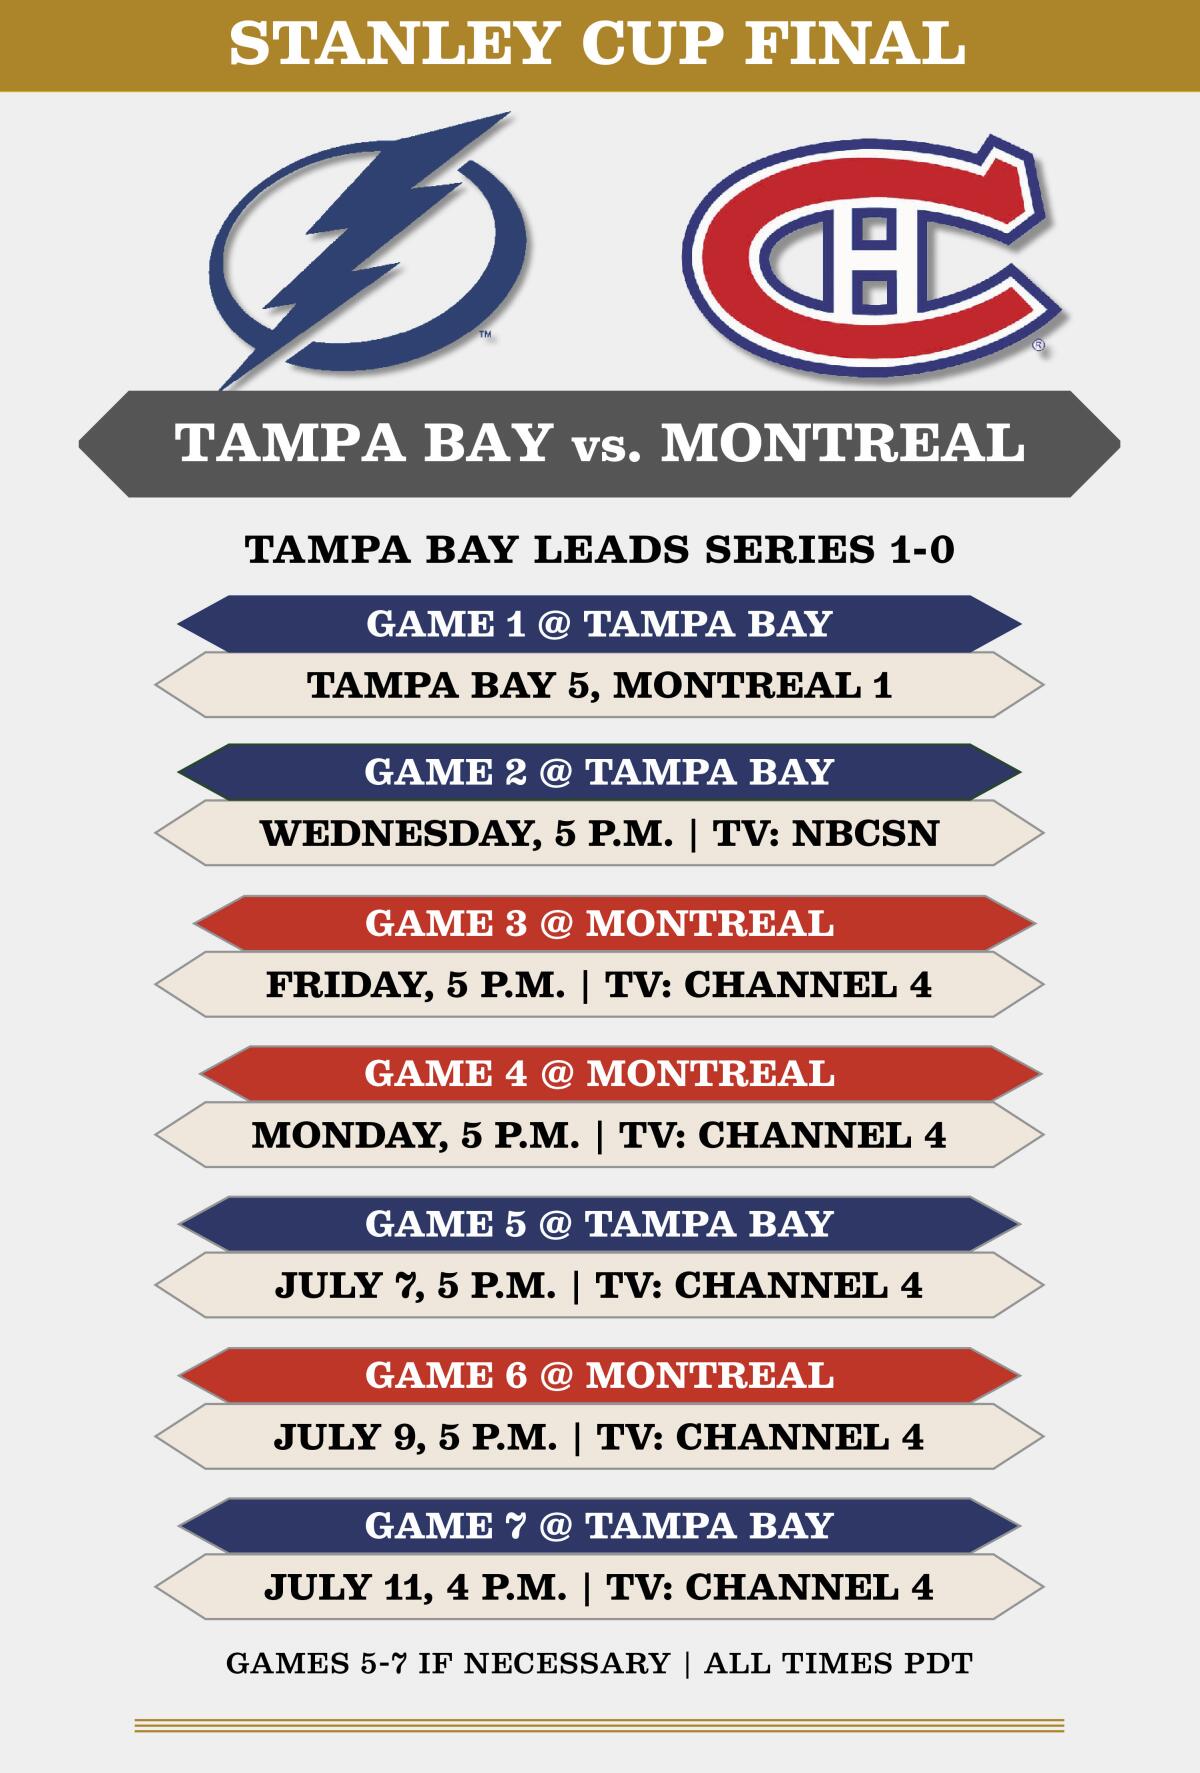 Stanley Cup finals schedule and results.